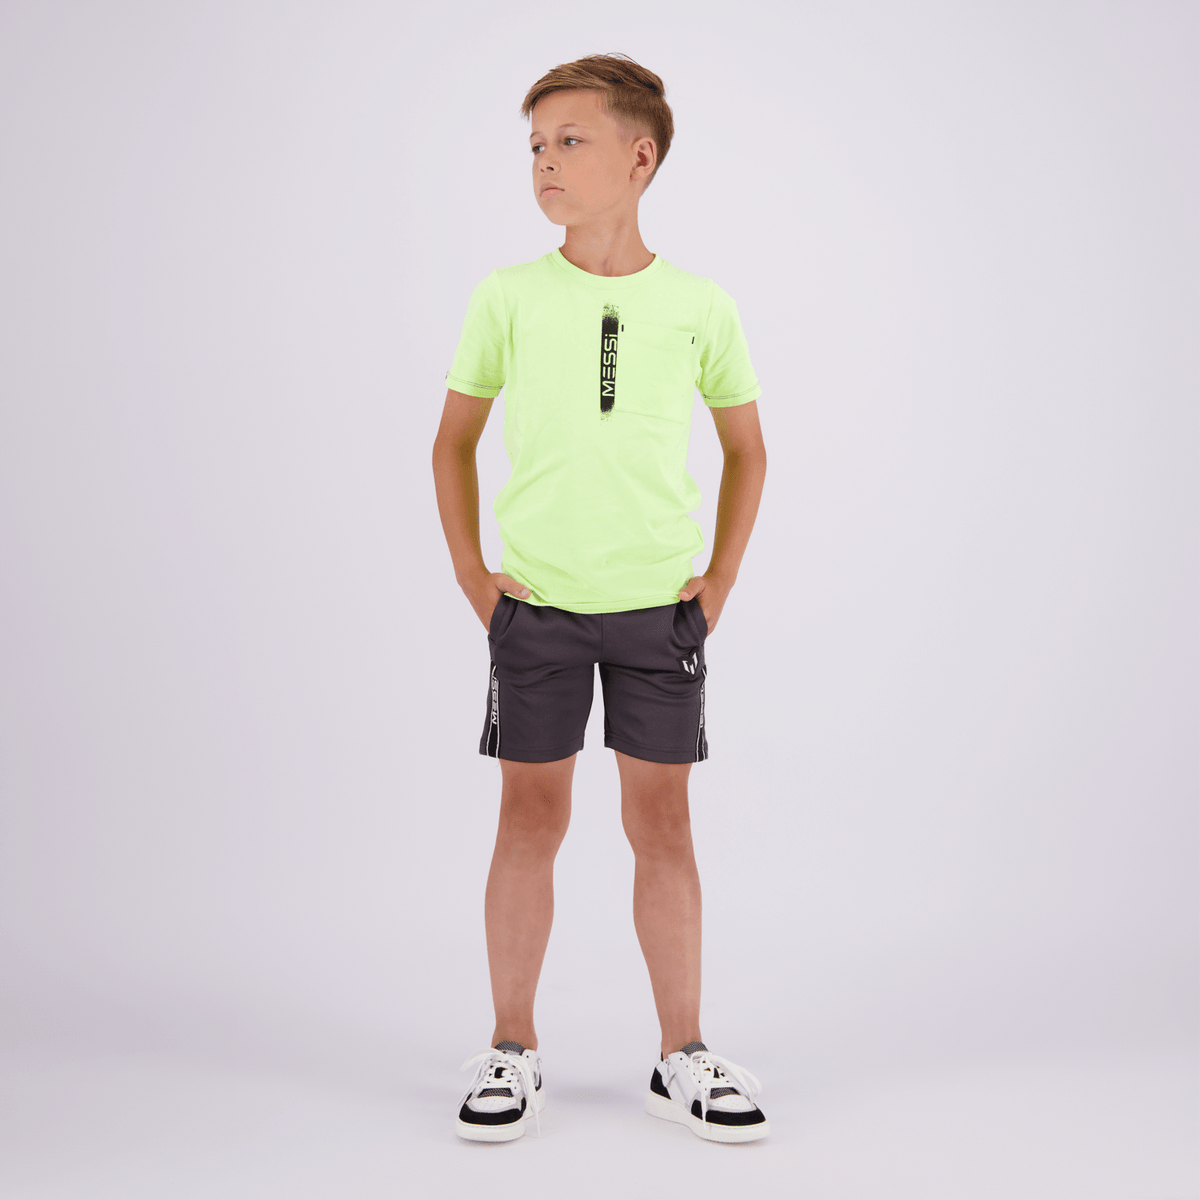 Jungen T-Shirt Jefos Neon Yellow Messi Collection